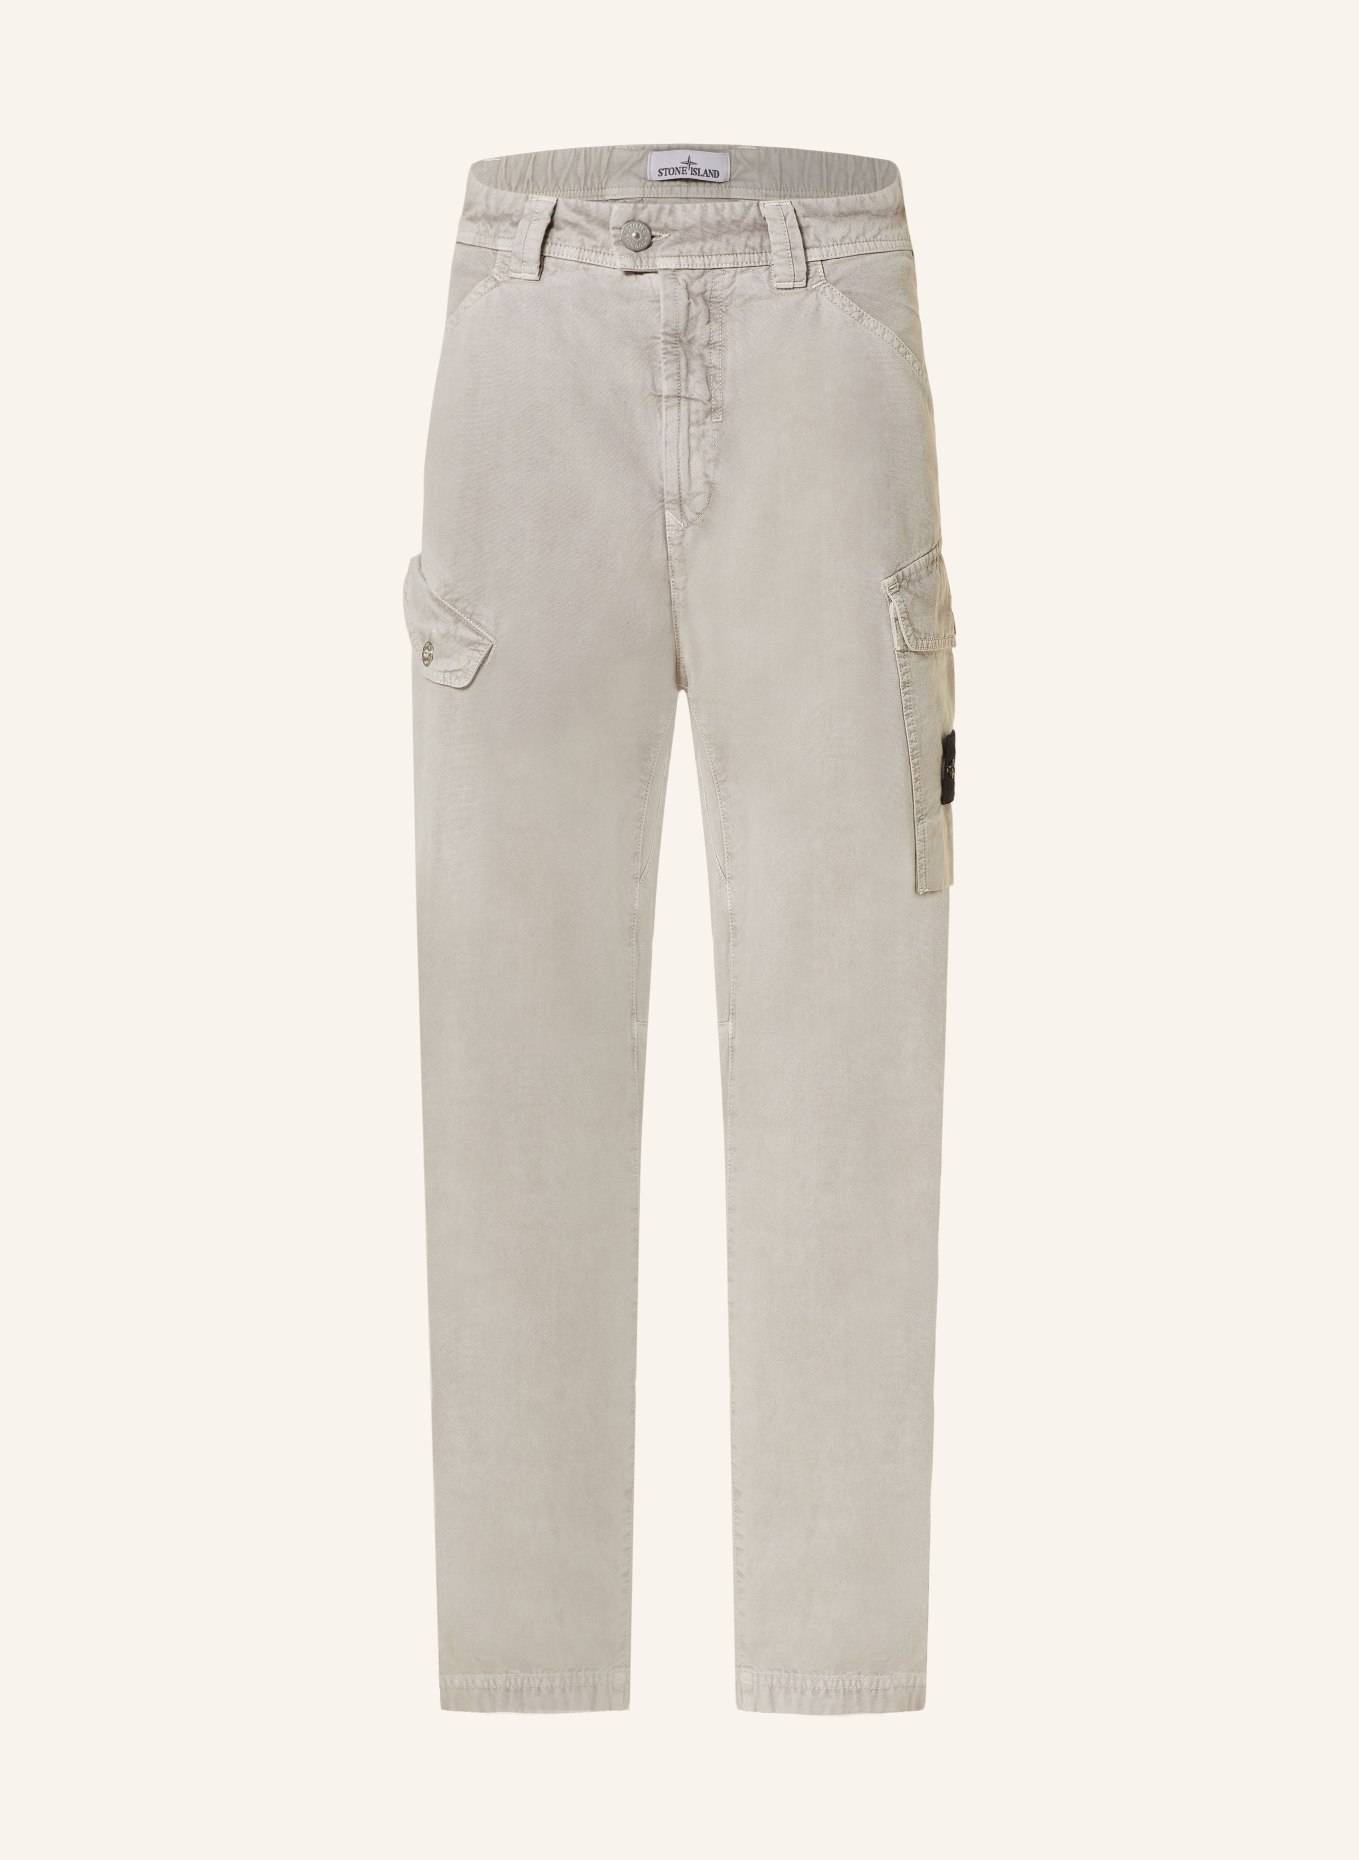 STONE ISLAND Cargo pants regular fit, Color: GRAY (Image 1)